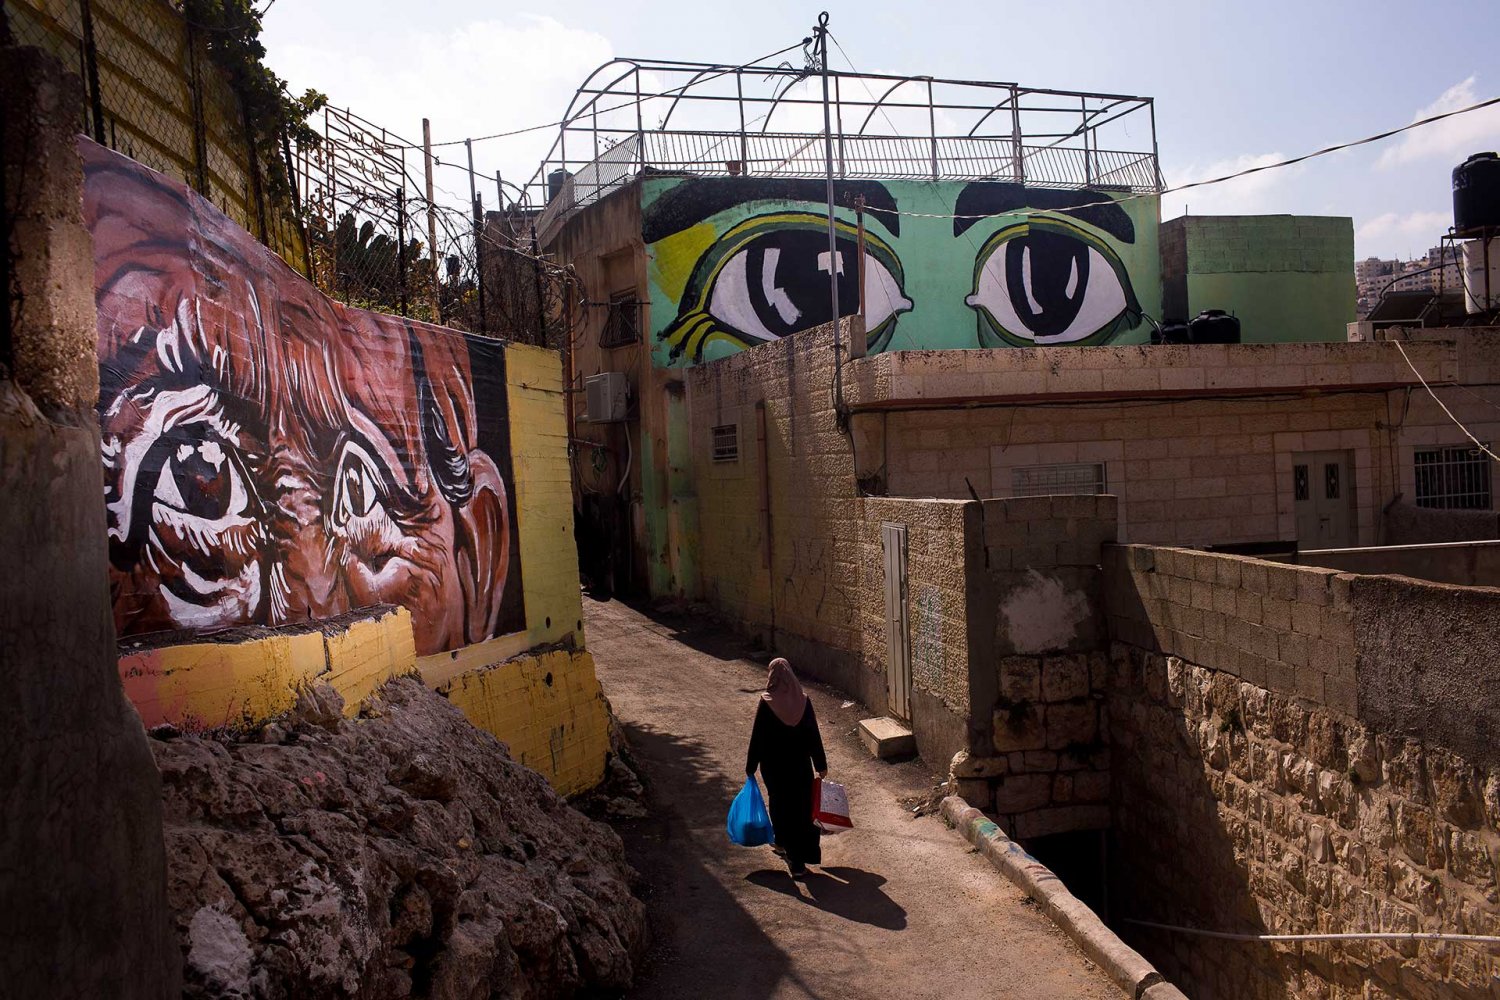 Different sets of eyes painted on homes in Silwan, East Jerusalem, in an art installation